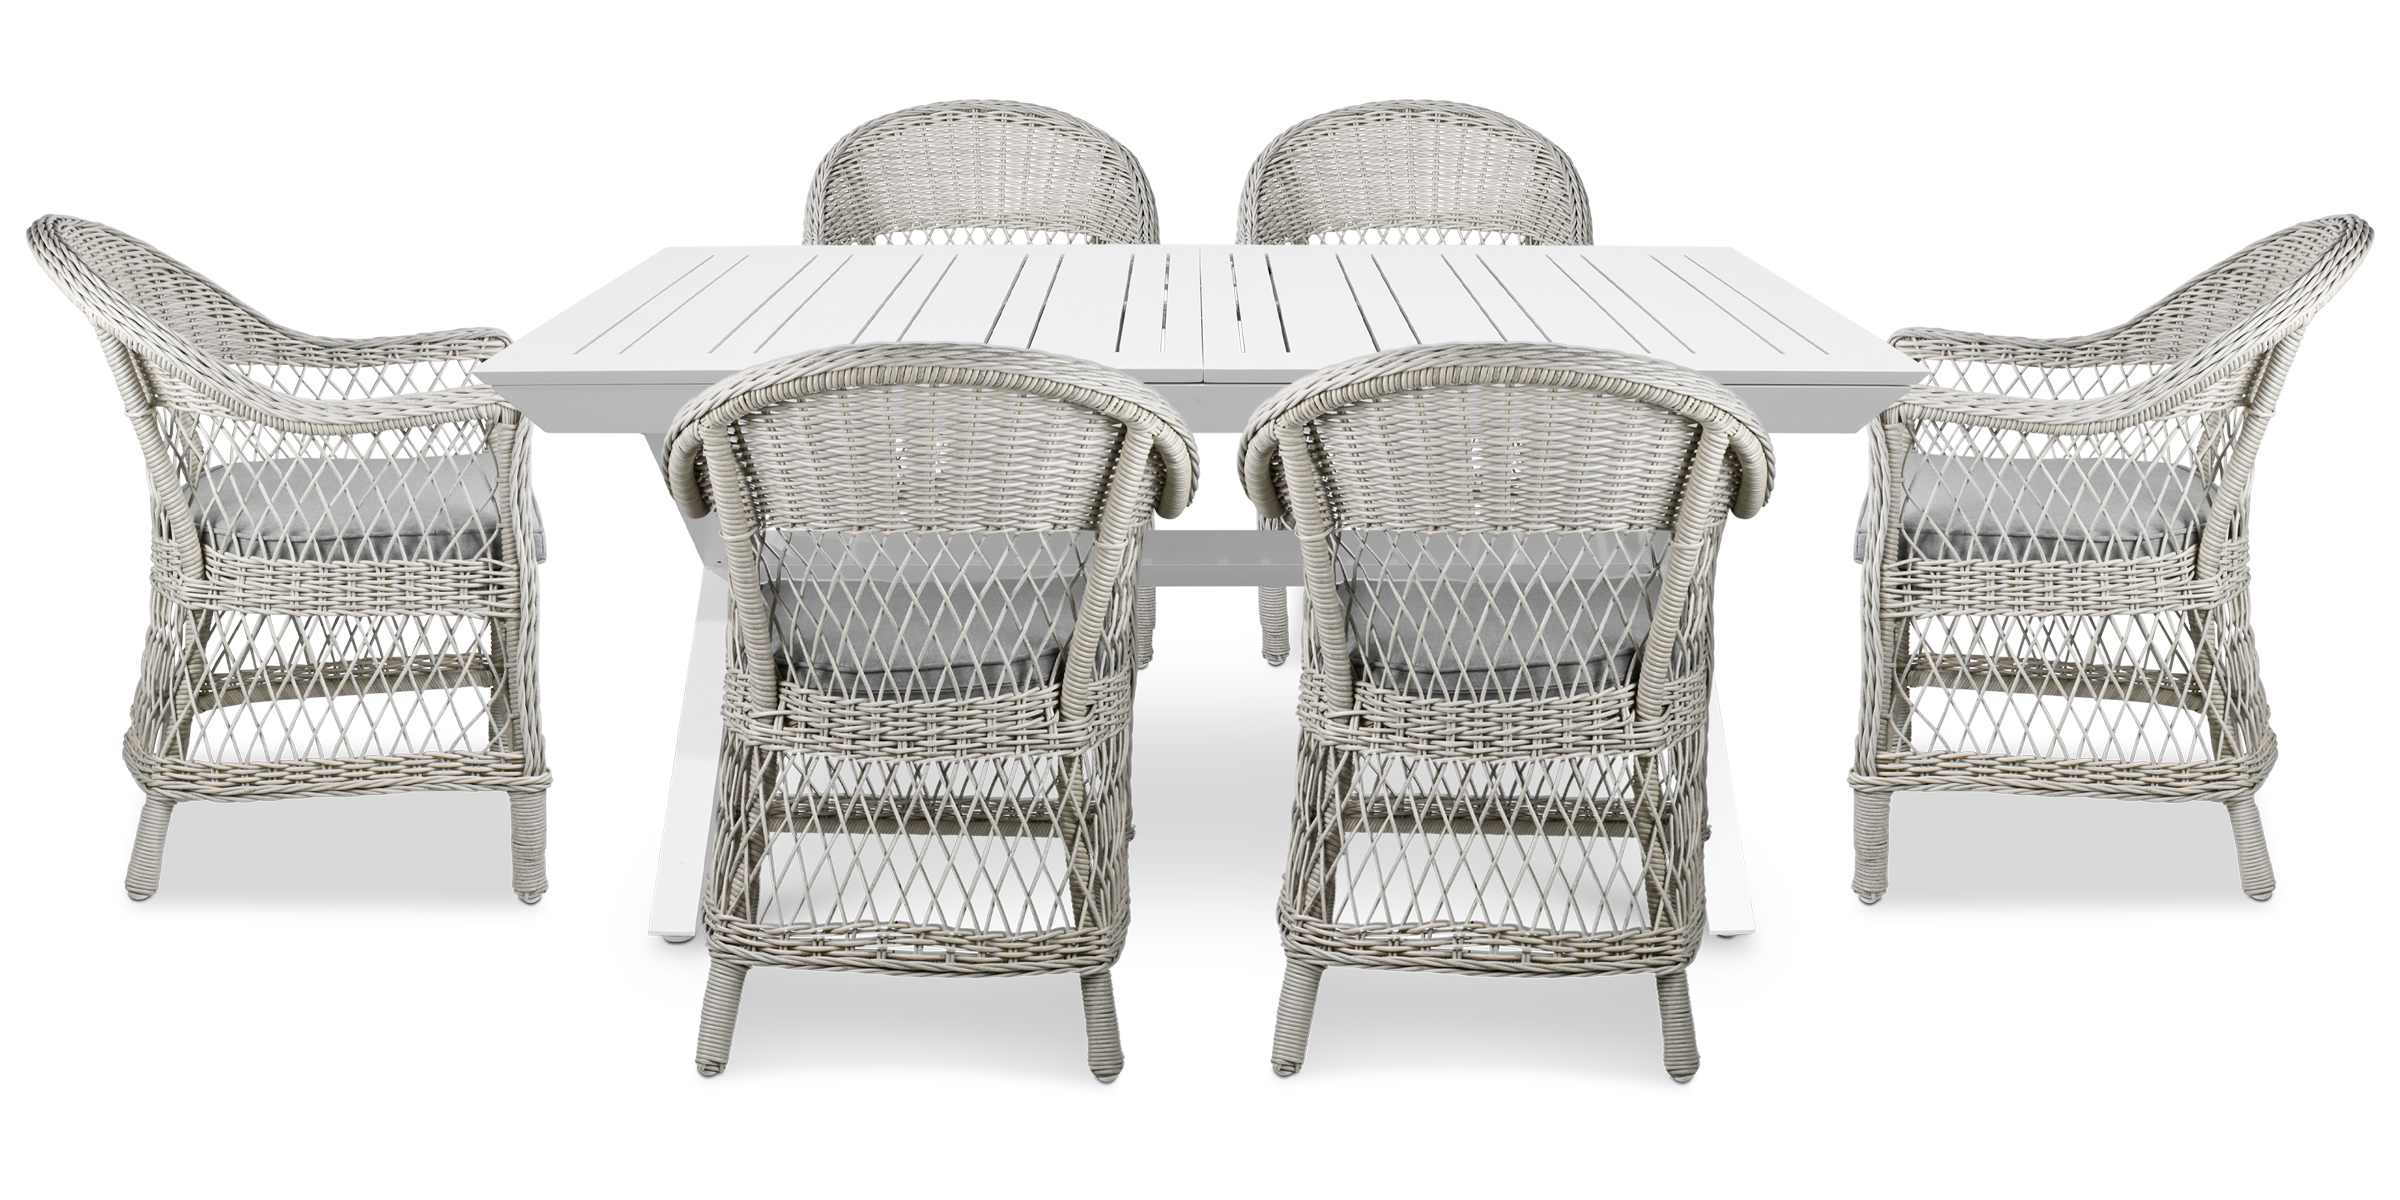 Caribbean Outdoor Extension Table in White with Wicker Chairs